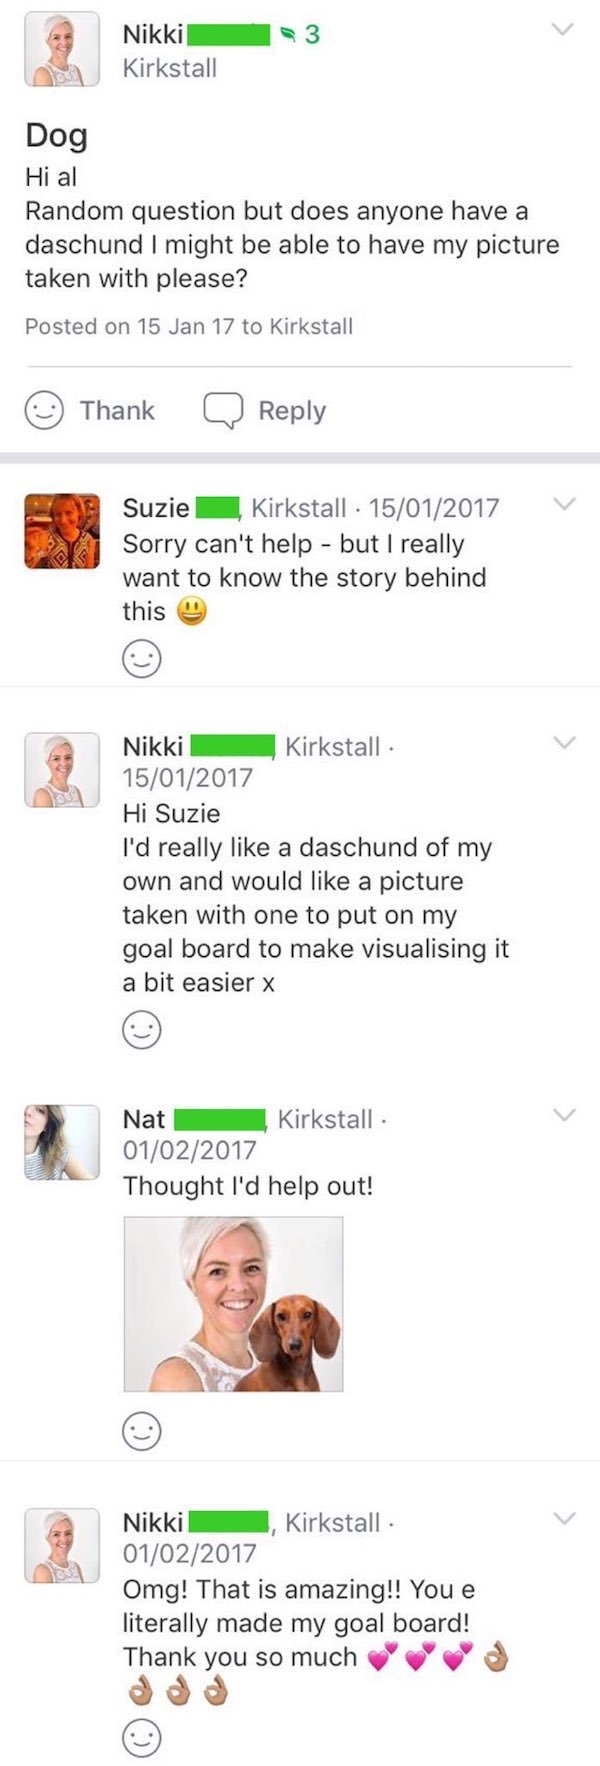 bestofnextdoor - 3 Nikki Kirkstall Dog Hi al Random question but does anyone have a daschund I might be able to have my picture taken with please? Posted on 15 Jan 17 to Kirkstall Thank Suzie Kirkstall 15012017 Sorry can't help but I really want to know t